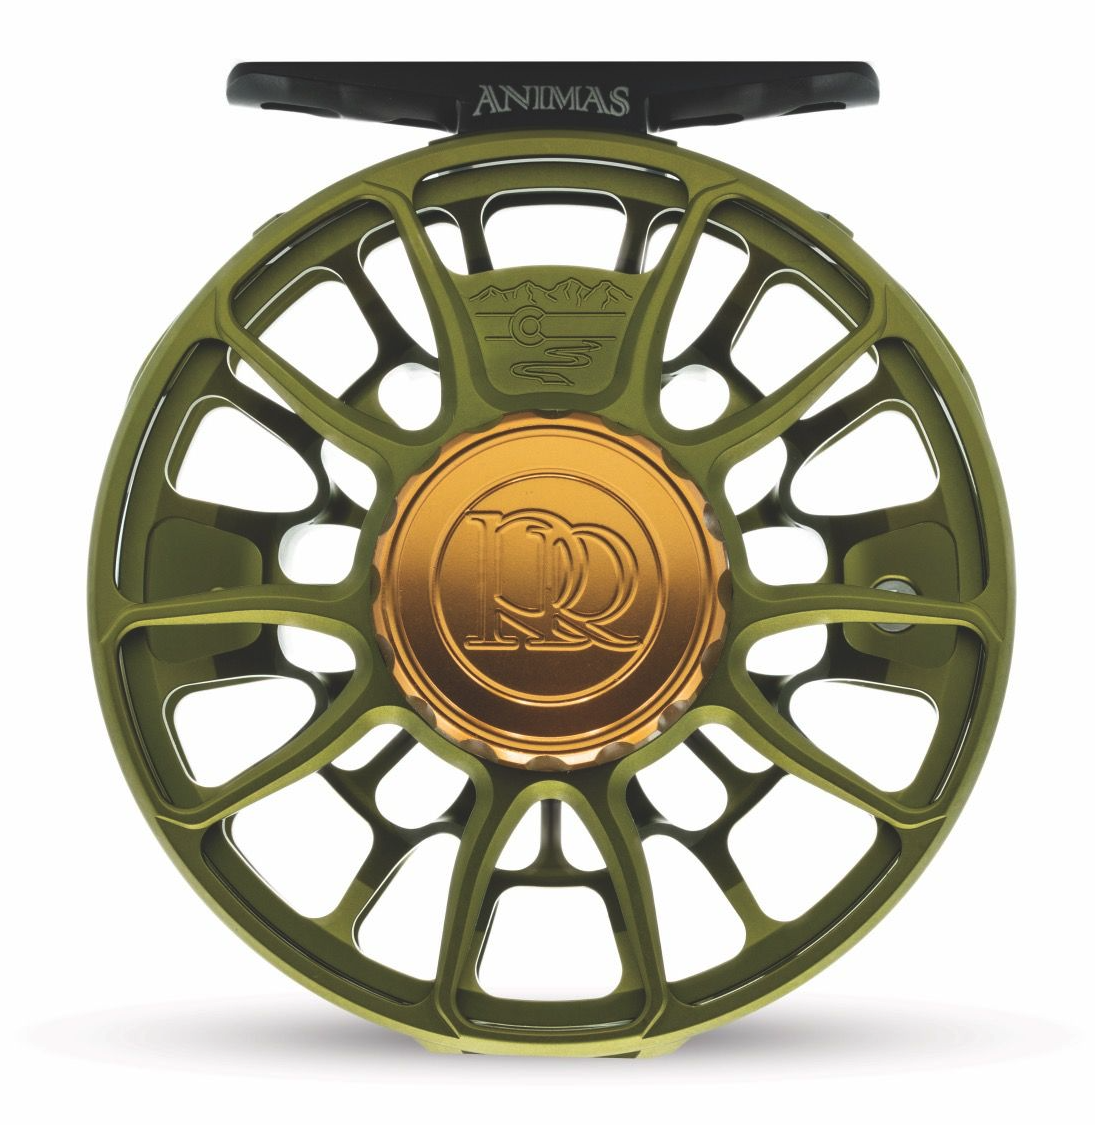 https://www.theflyfishers.com/Content/files/RossReels/Animas/AnimasFrontOlive.png